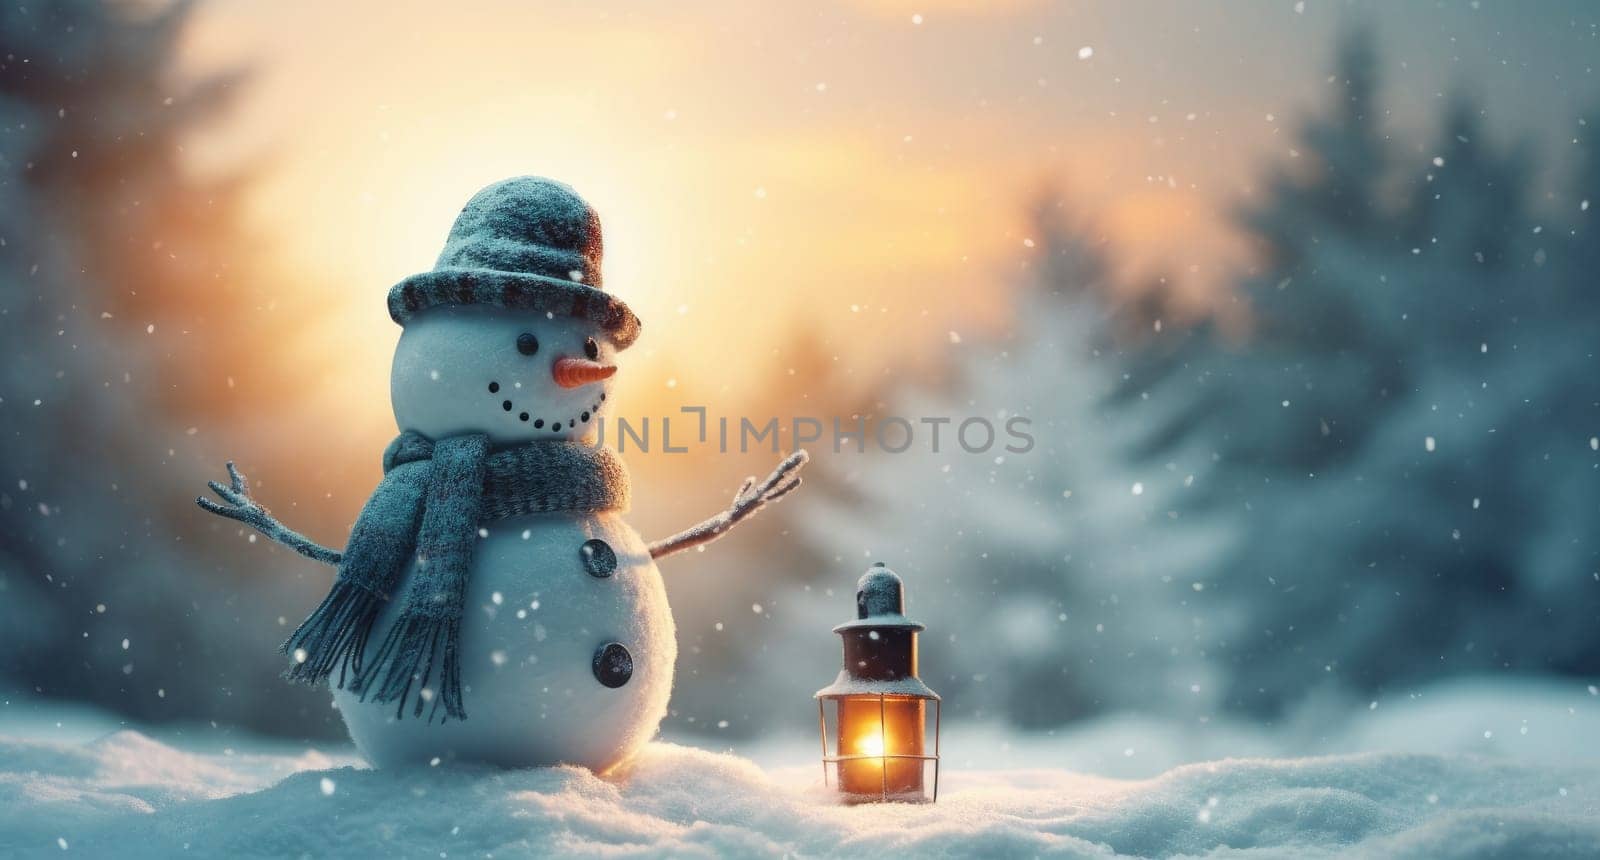 Little snowman in the snow by cherezoff